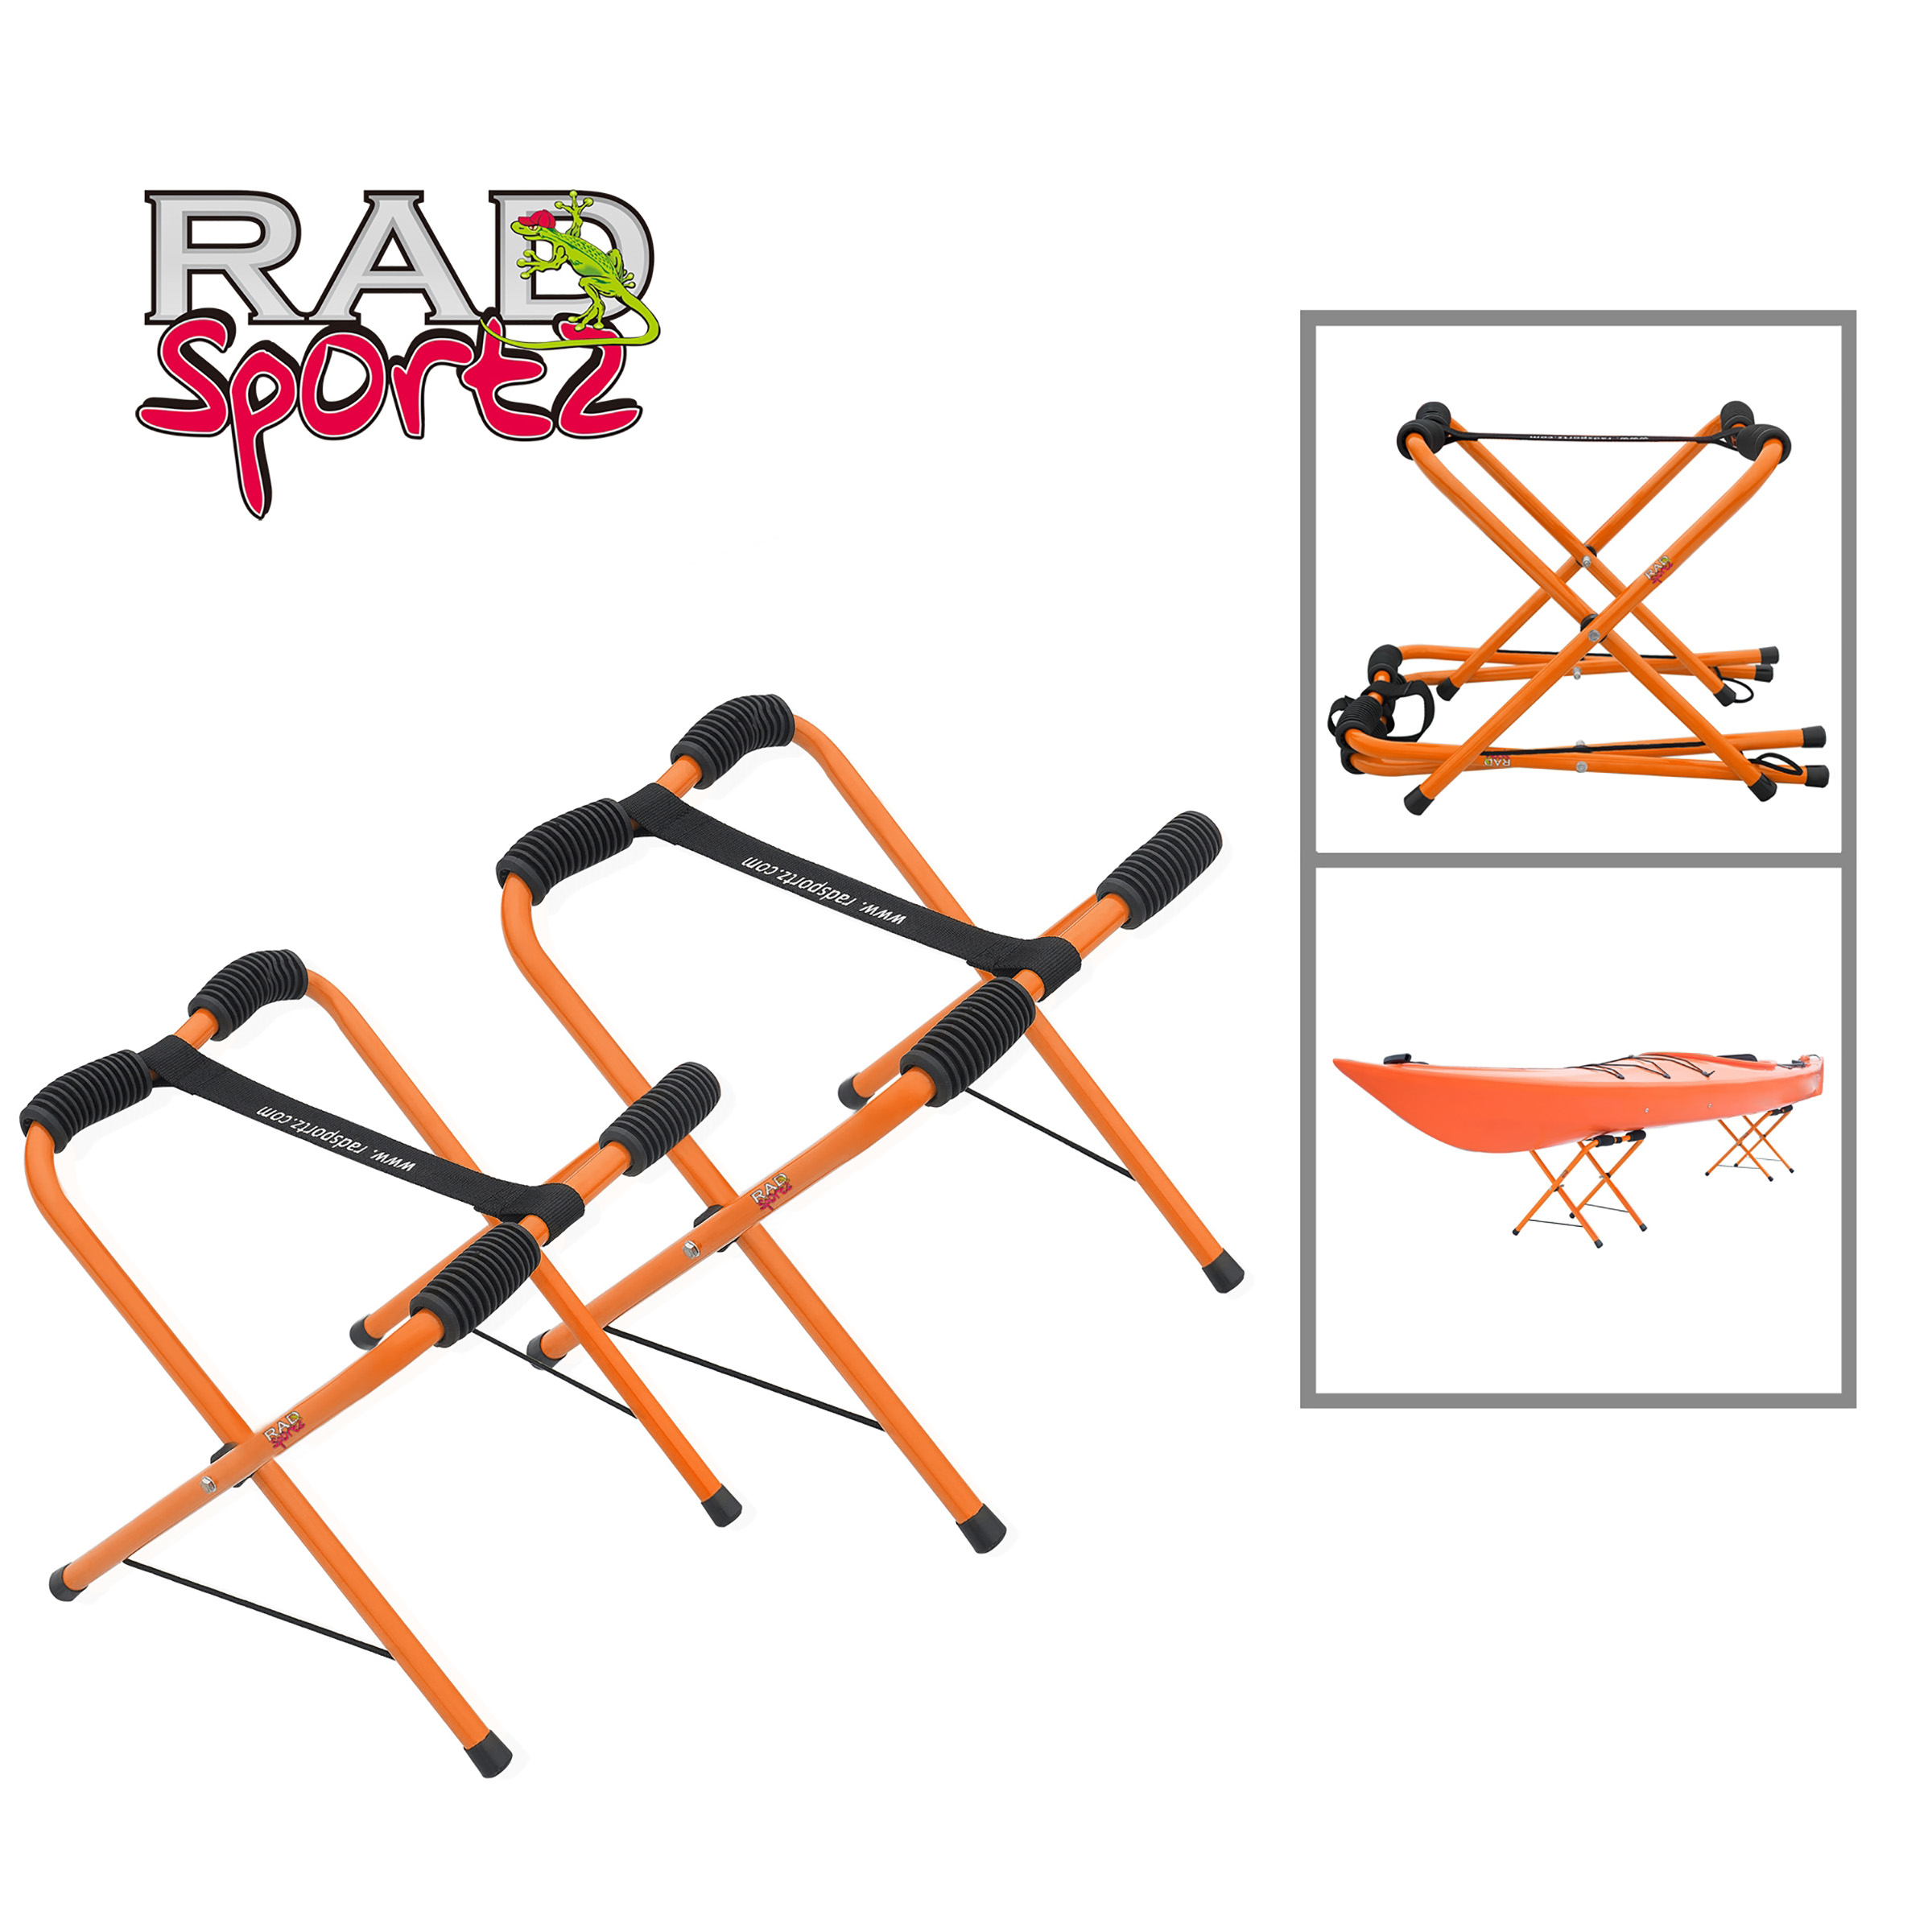 RAD Sportz Portable Kayak Paddle Board Easy Stands Fold For Easy Storage Carry Bag Included